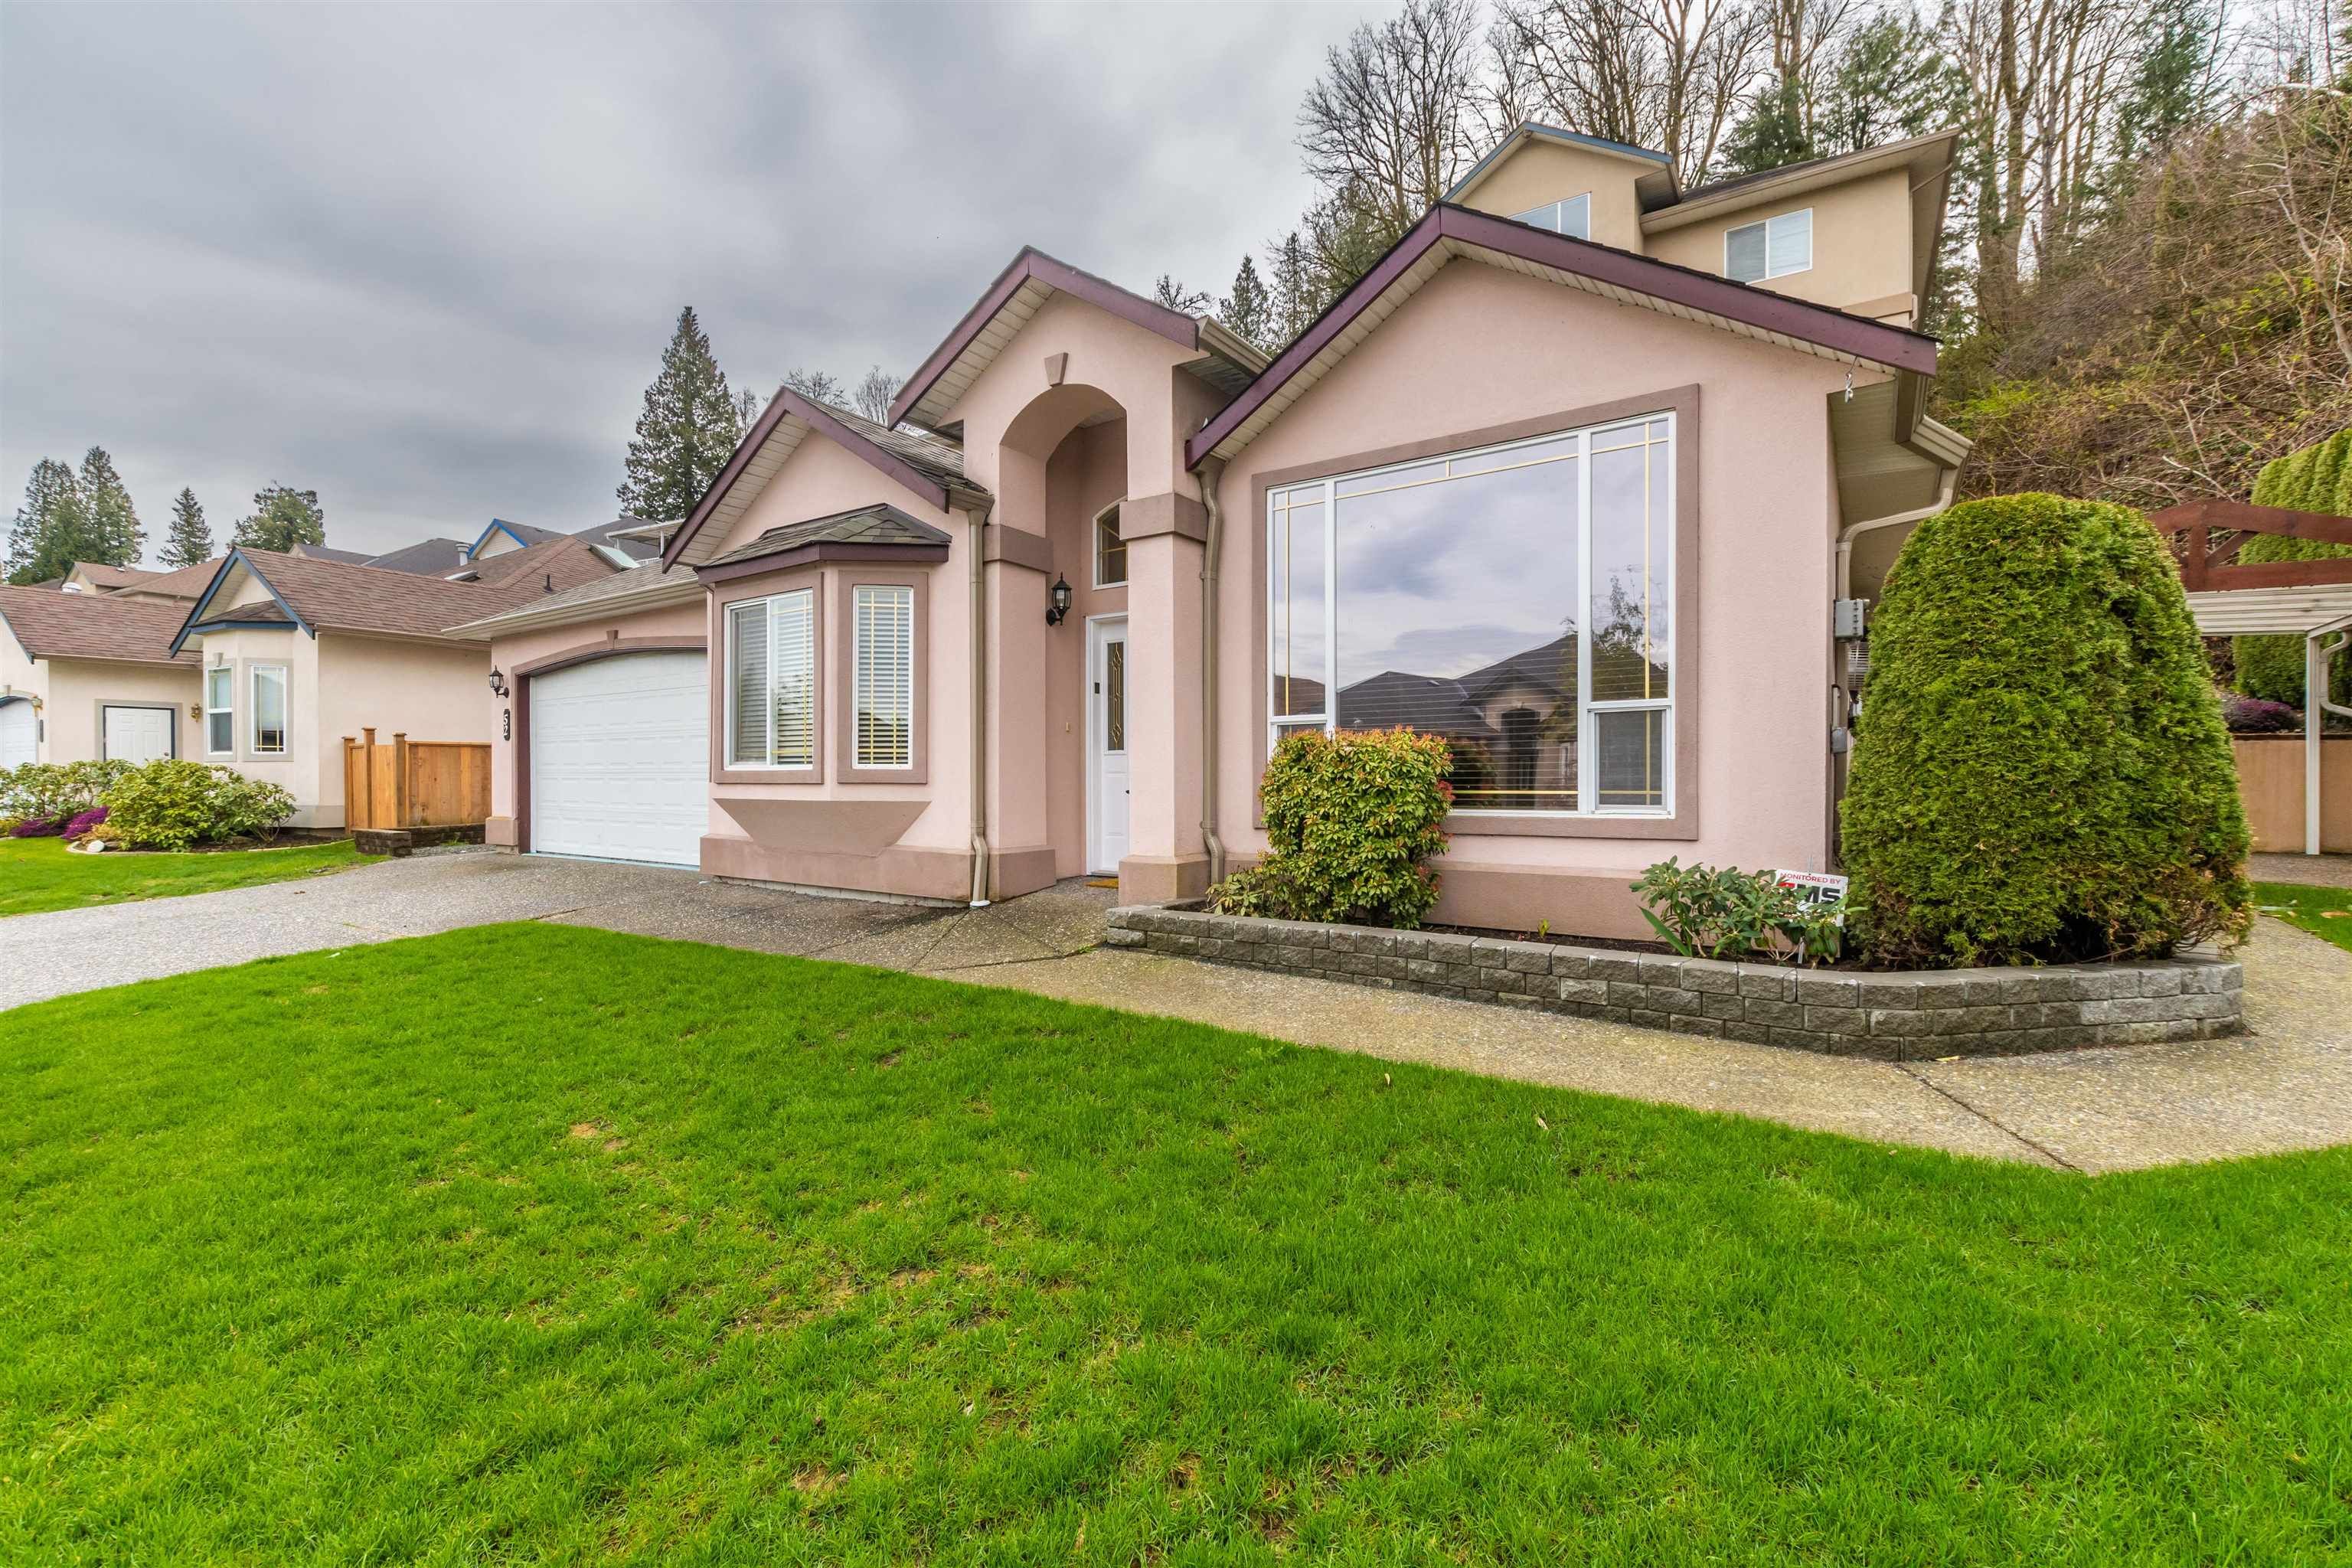 New property listed in Little Mountain, Chilliwack